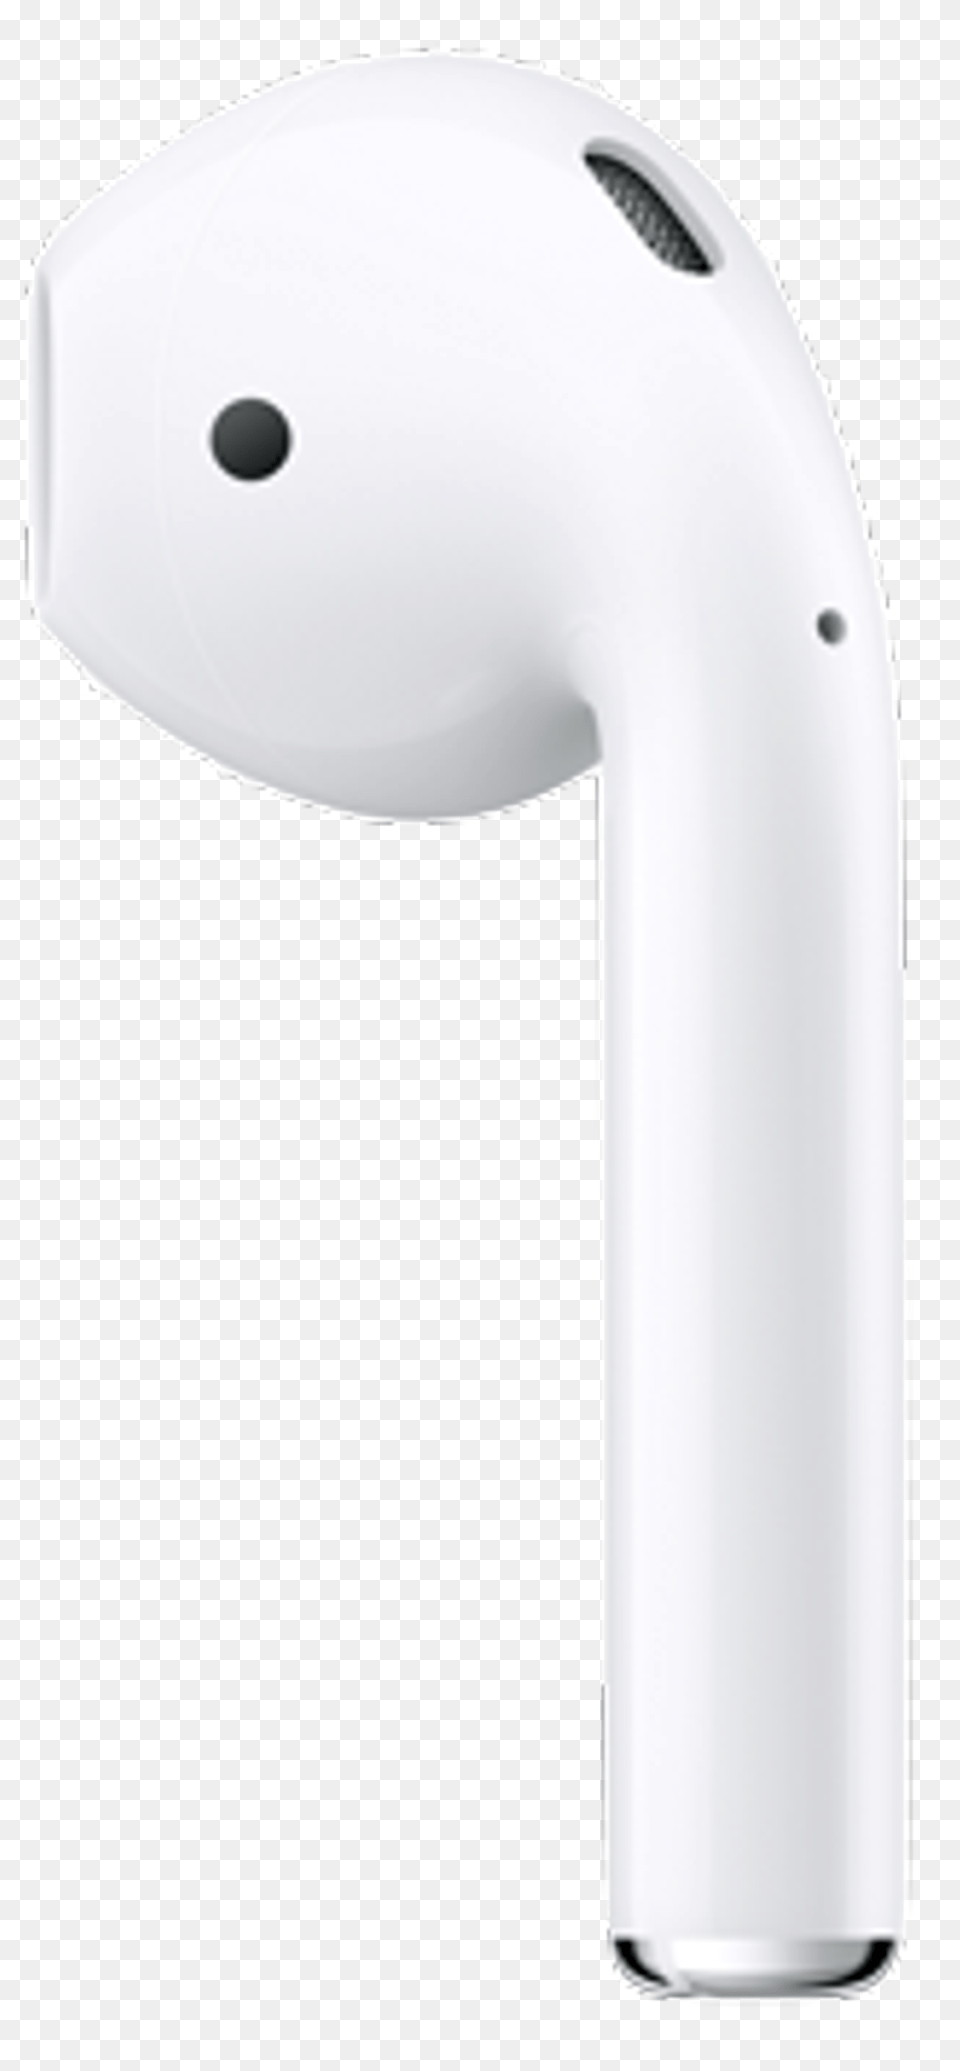 Download Angle Airpods Tap Apple Hq Image Clear Background Airpod, Sink, Sink Faucet, Appliance, Blow Dryer Free Transparent Png